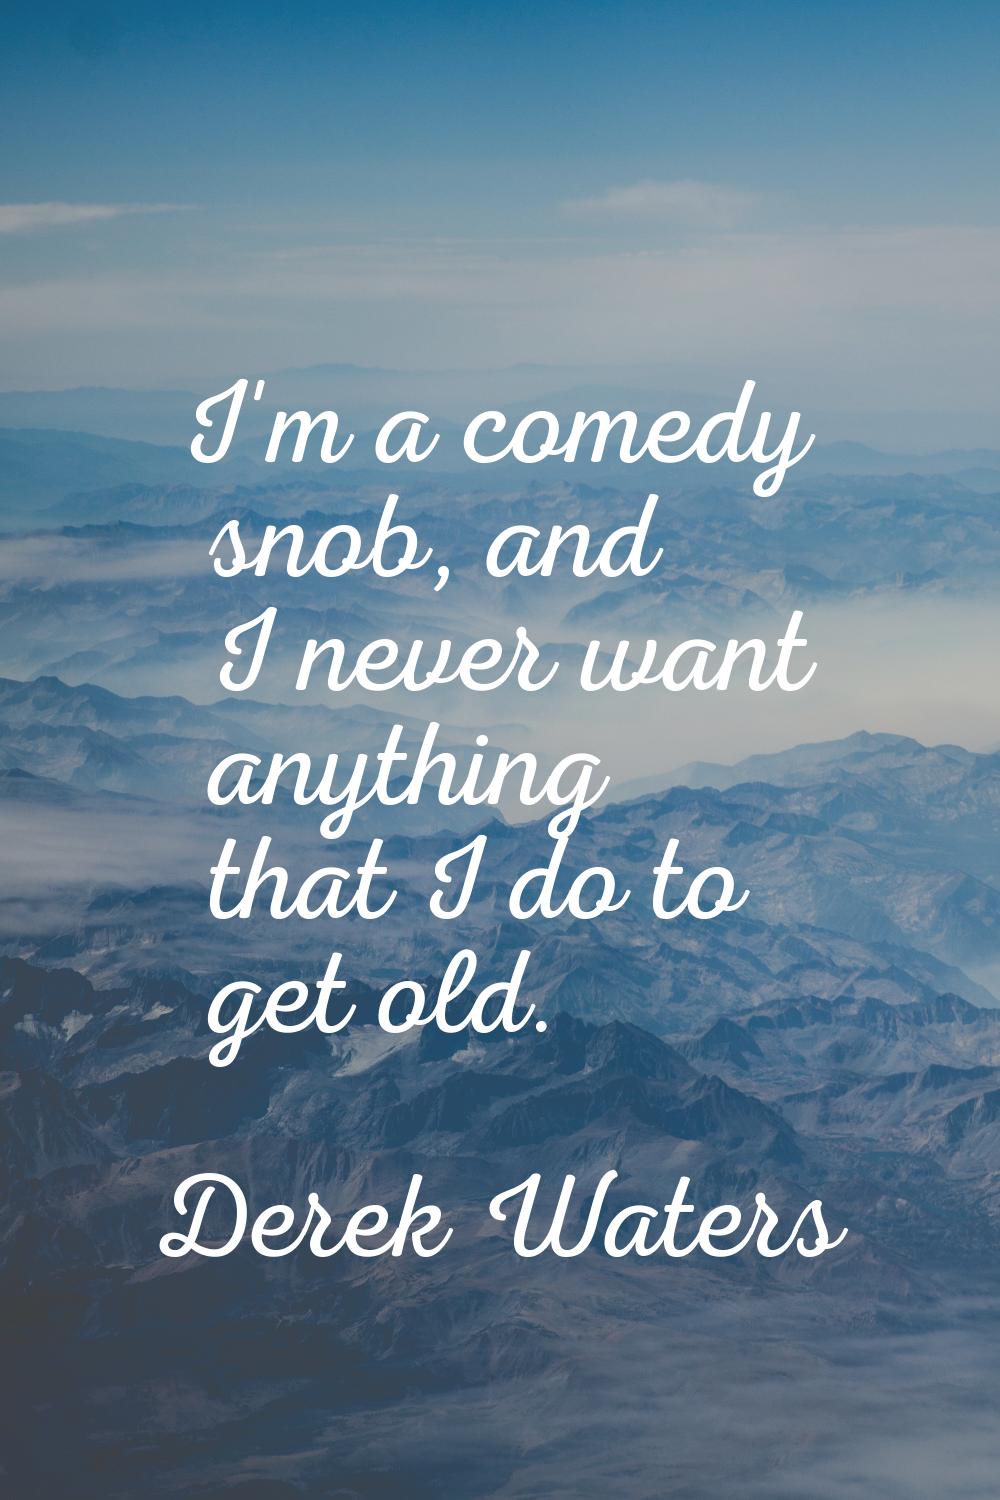 I'm a comedy snob, and I never want anything that I do to get old.